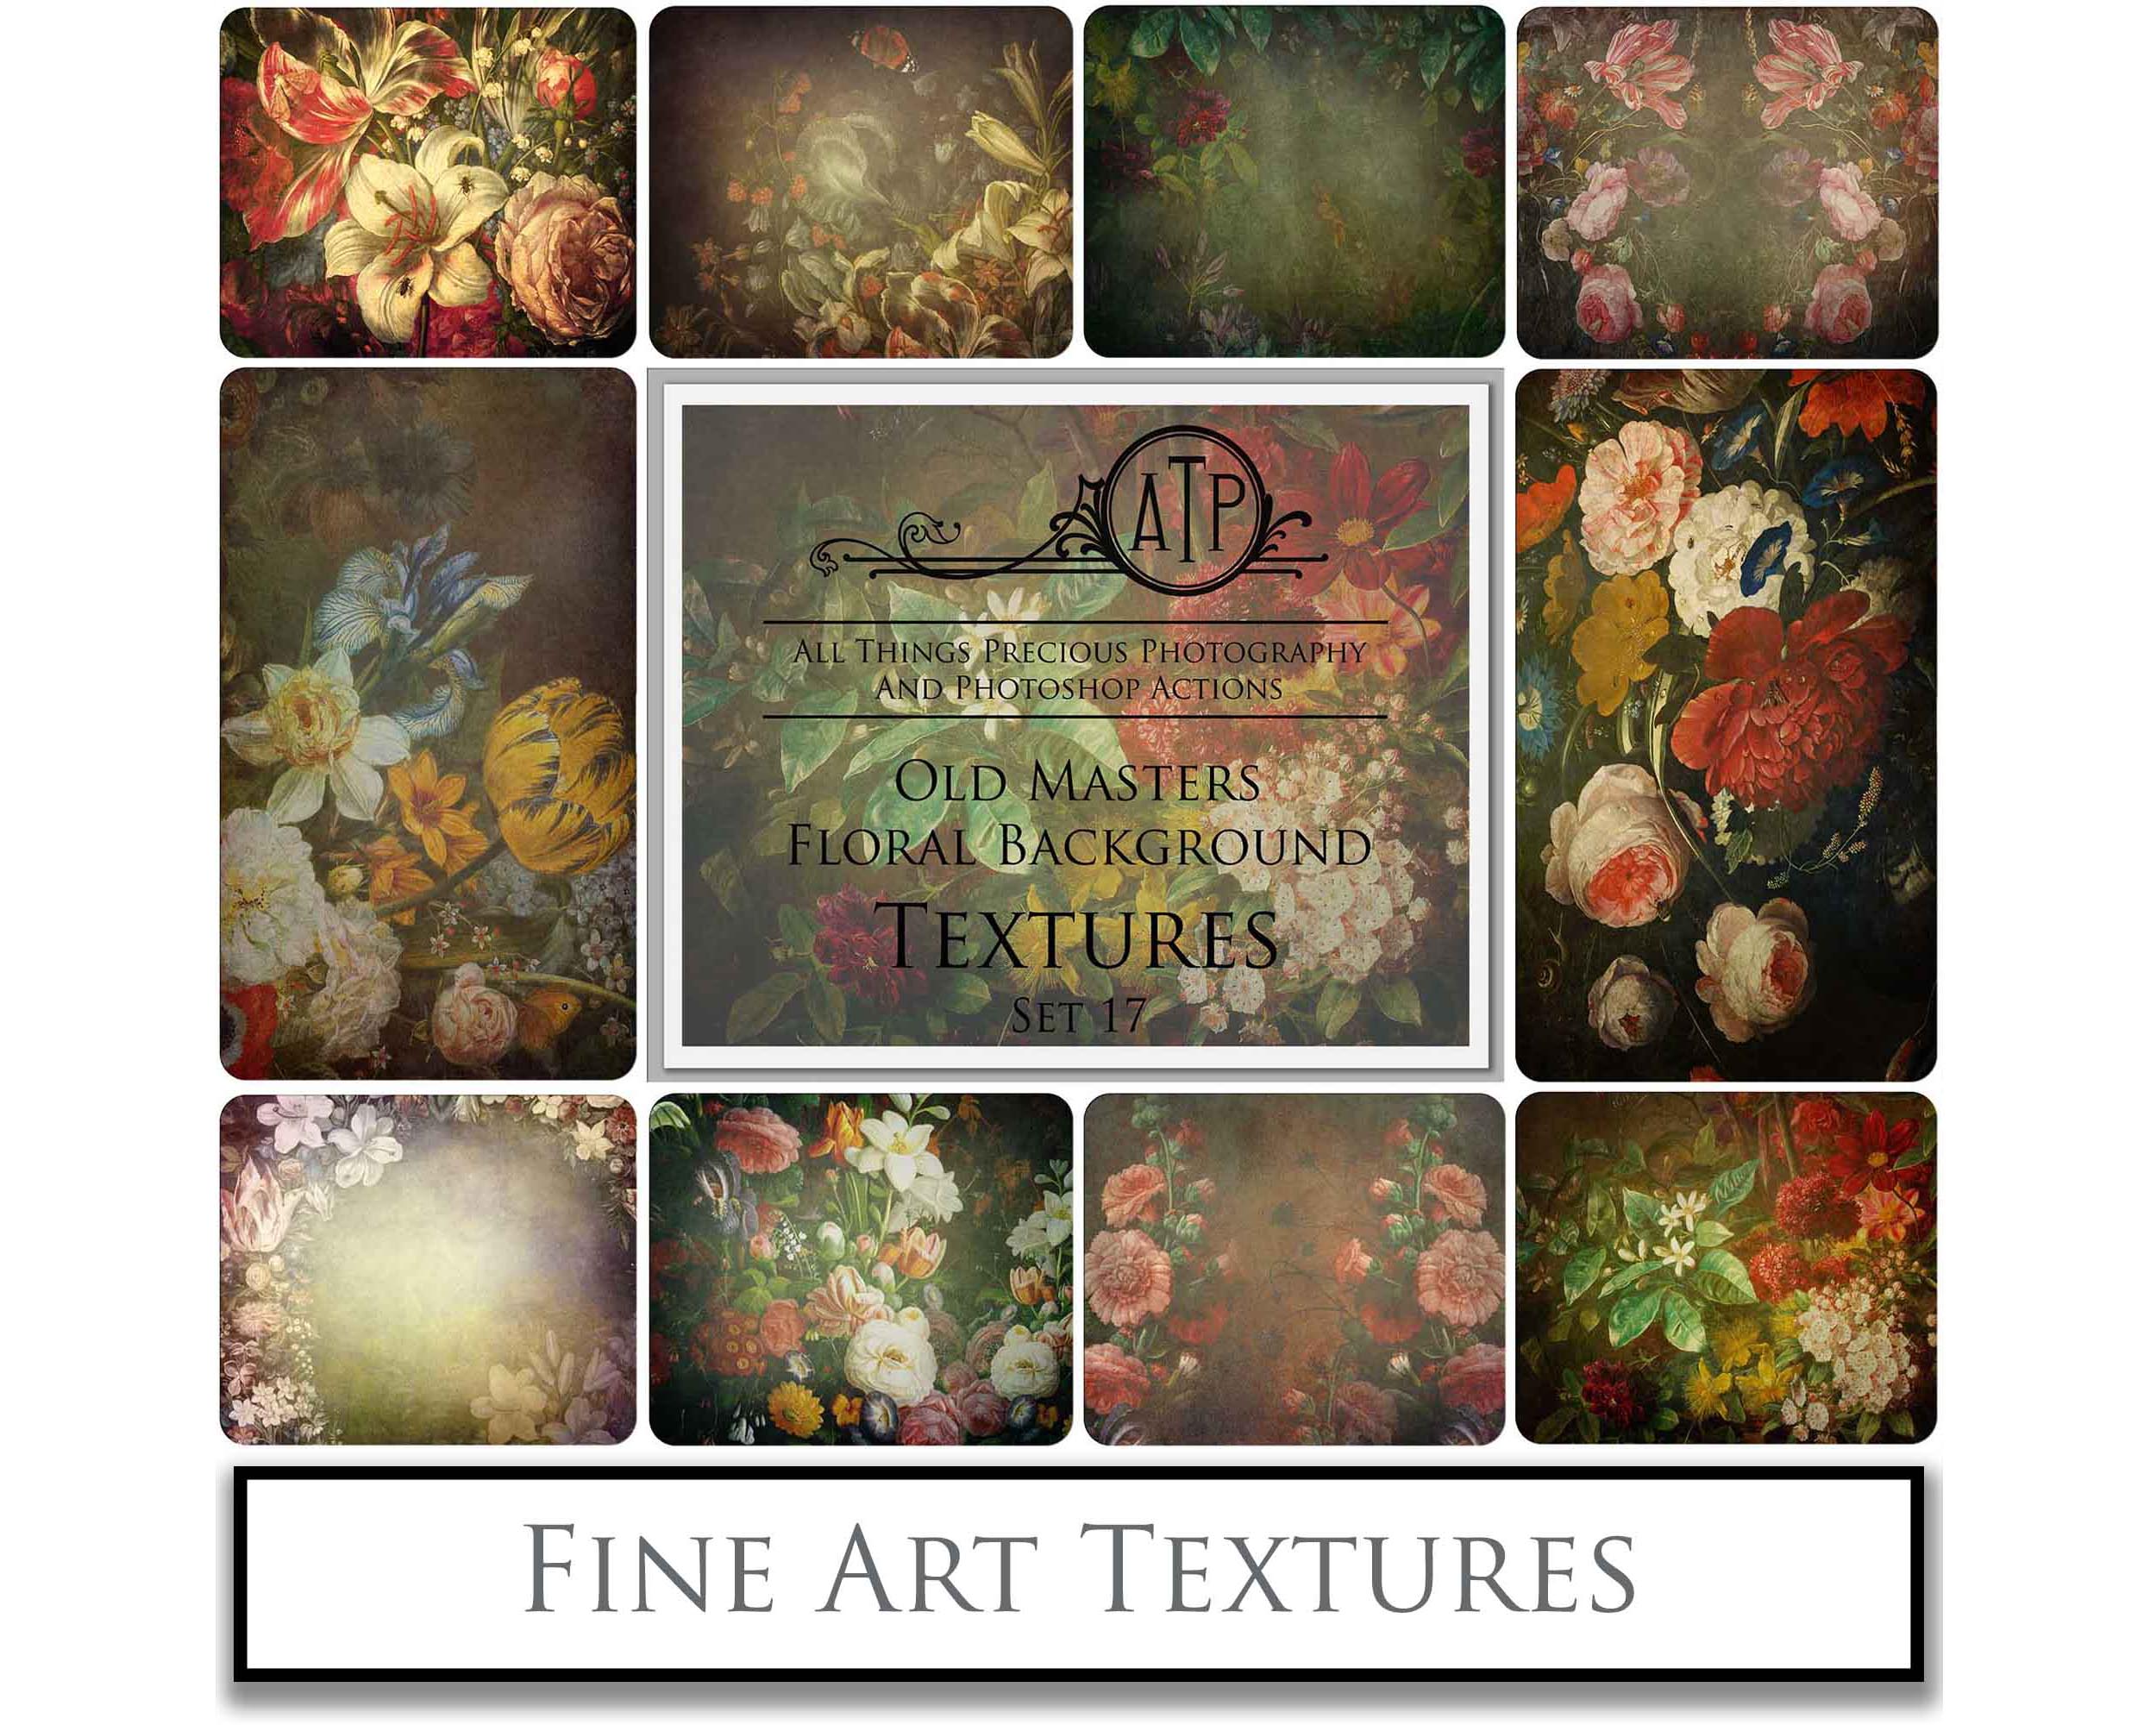 Old Masters floral Backgrounds. Digital Backdrop Fine art texture for photographers. Photo Overlays. Antique, Old World, Grunge, Abstract wall decor bundle. Textured Background. Printable backdrop, Colour Flower Print Bundle. High resolution, 300dpi Graphic Assets for photography, scrapbooking, design. By ATP Textures